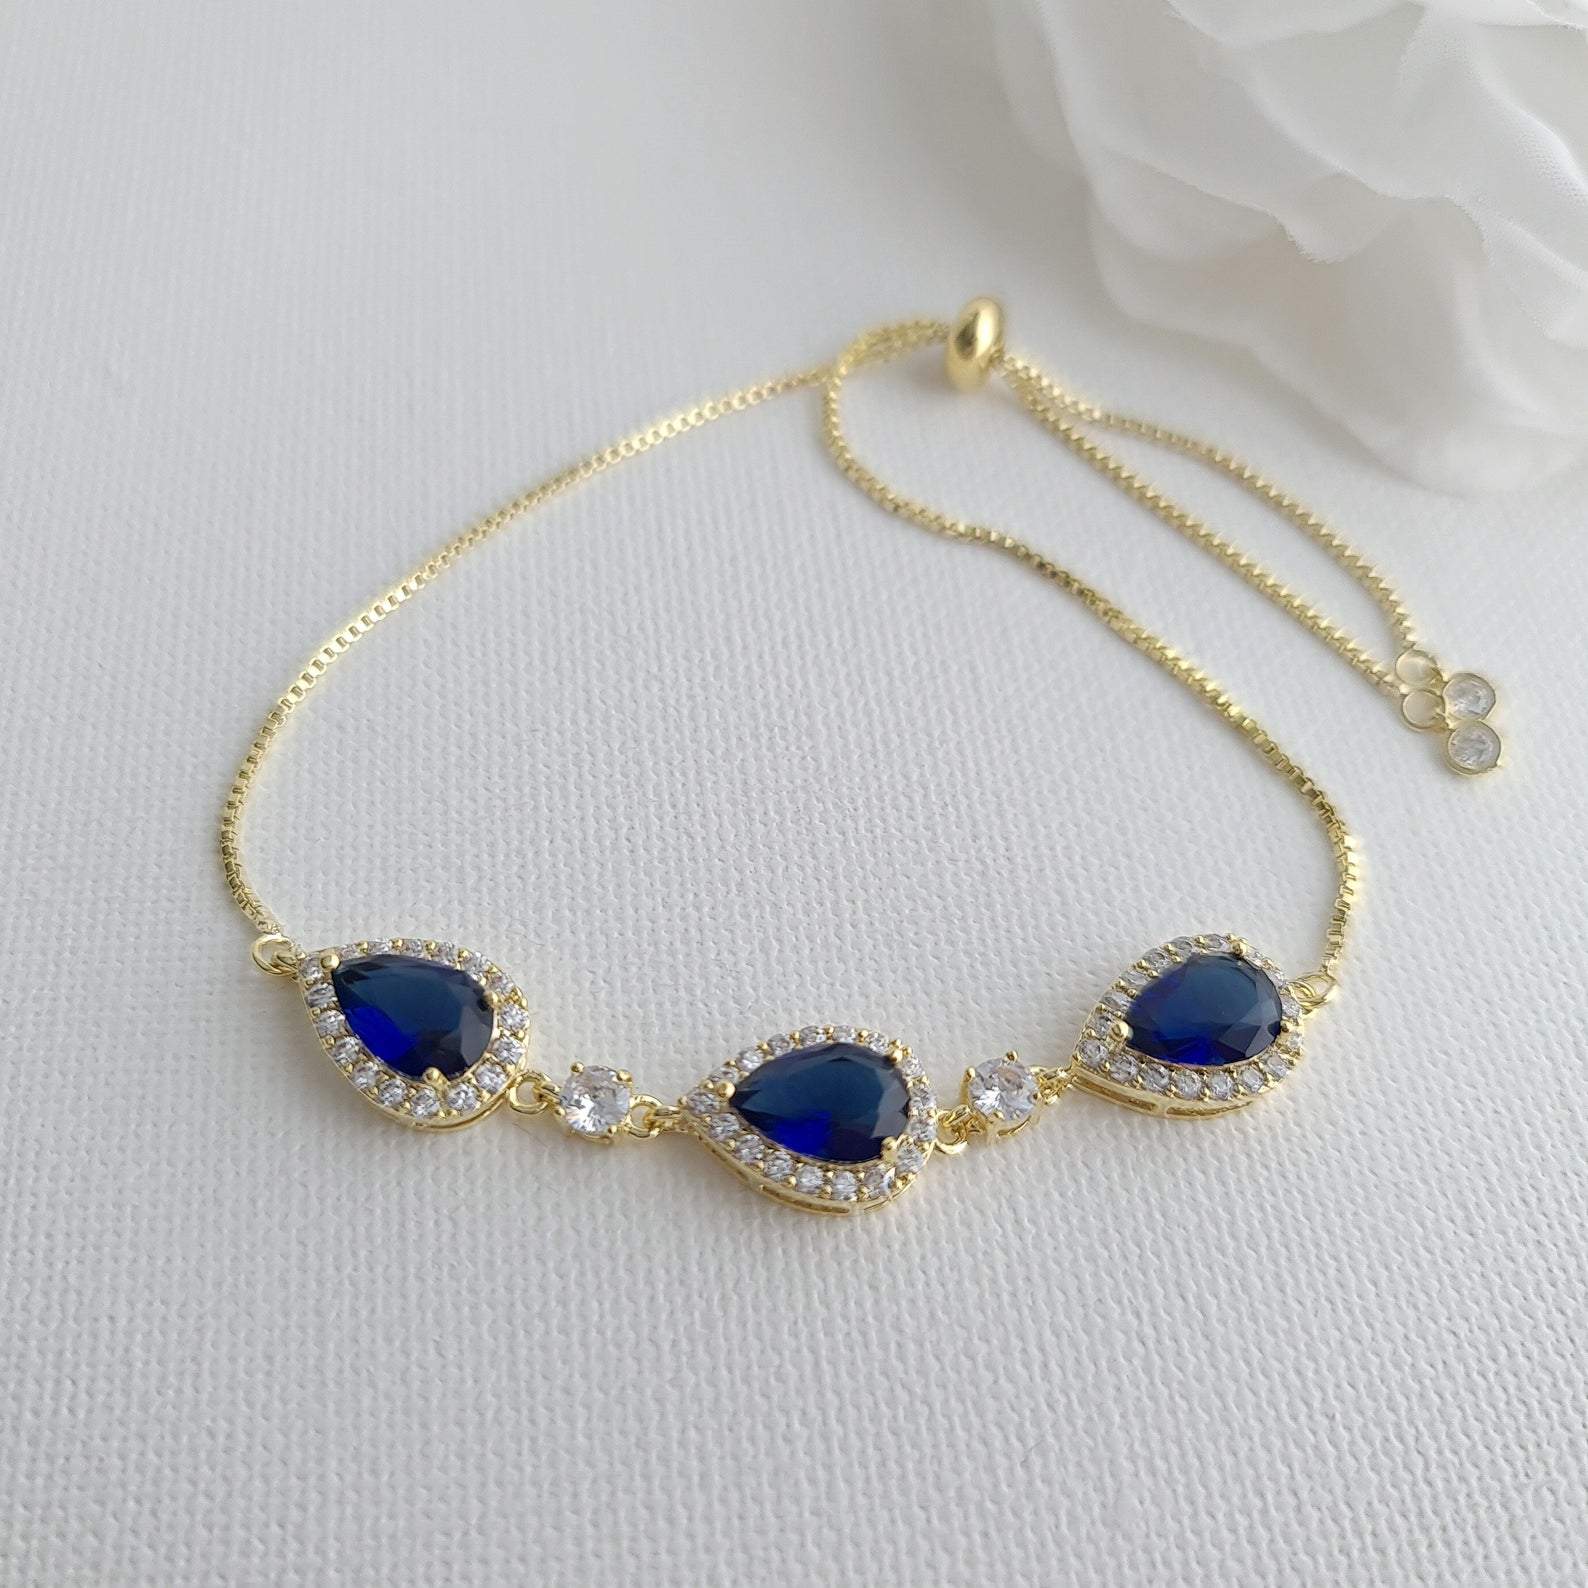 Bracelet in Sapphire Blue & Rose Gold for Bride & Bridesmaids-Aoi - PoetryDesigns